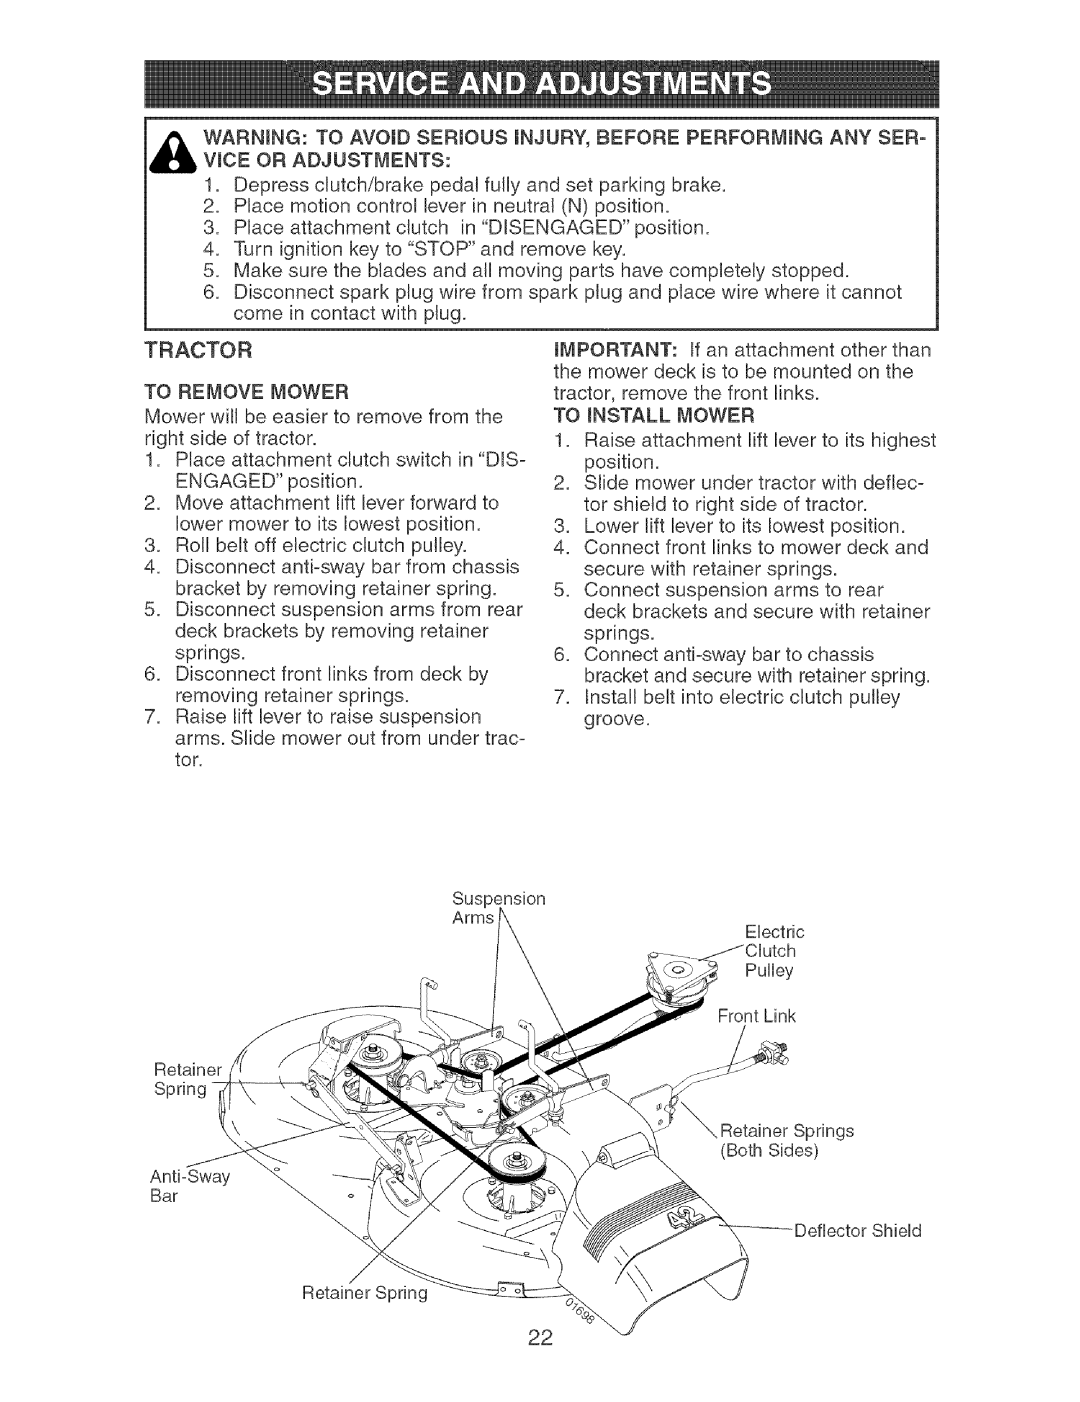 Craftsman 917.27404 owner manual Place motioncontrol leverin neutralN position 